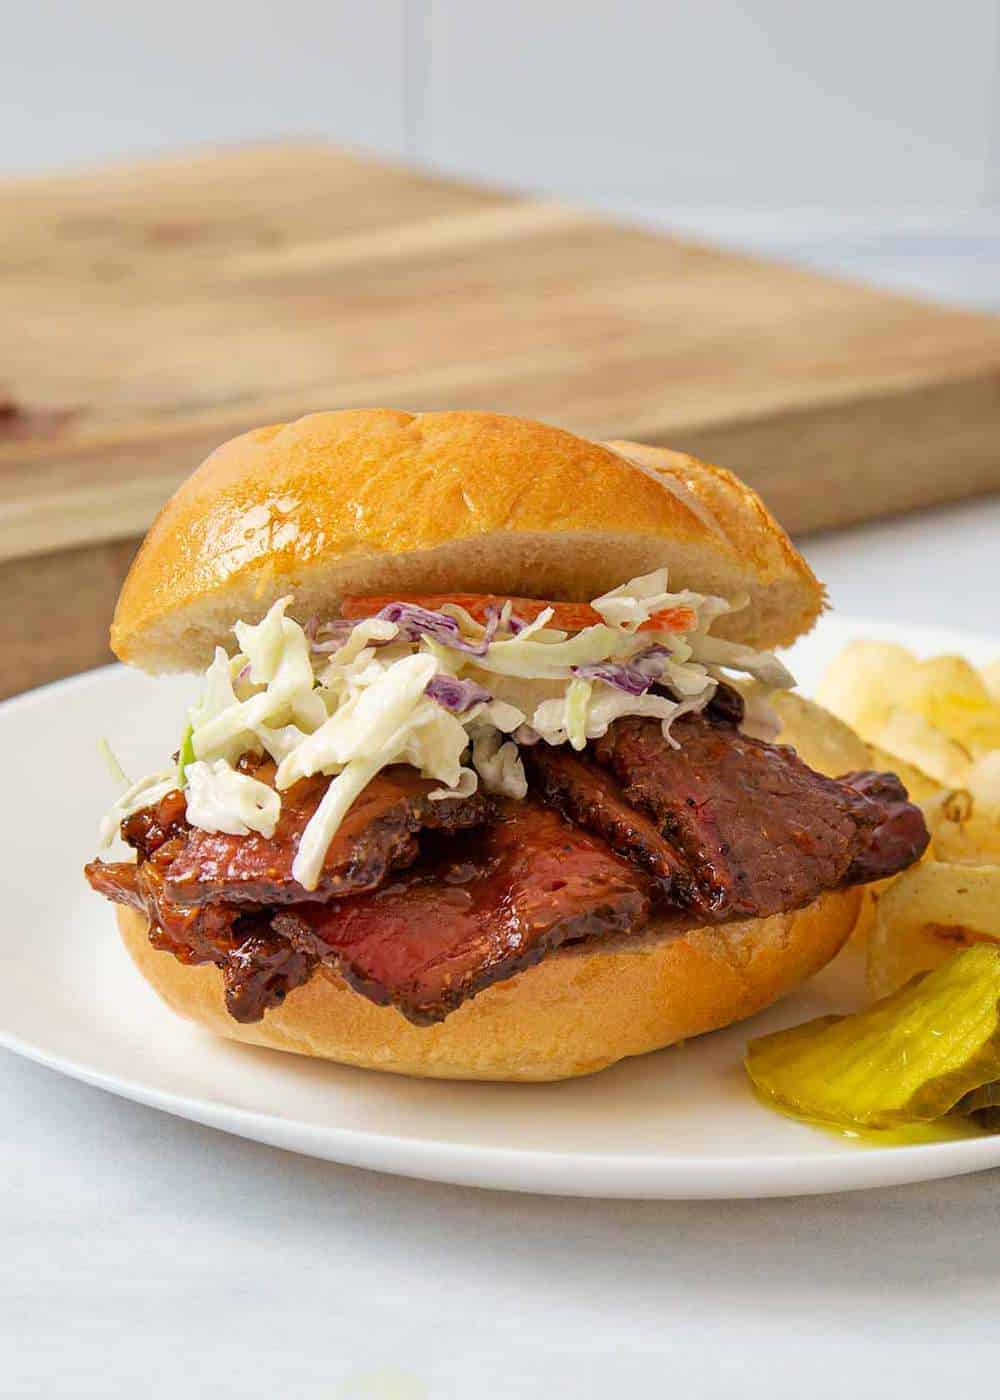 A BBQ brisket sandwich with coleslaw on a plate.